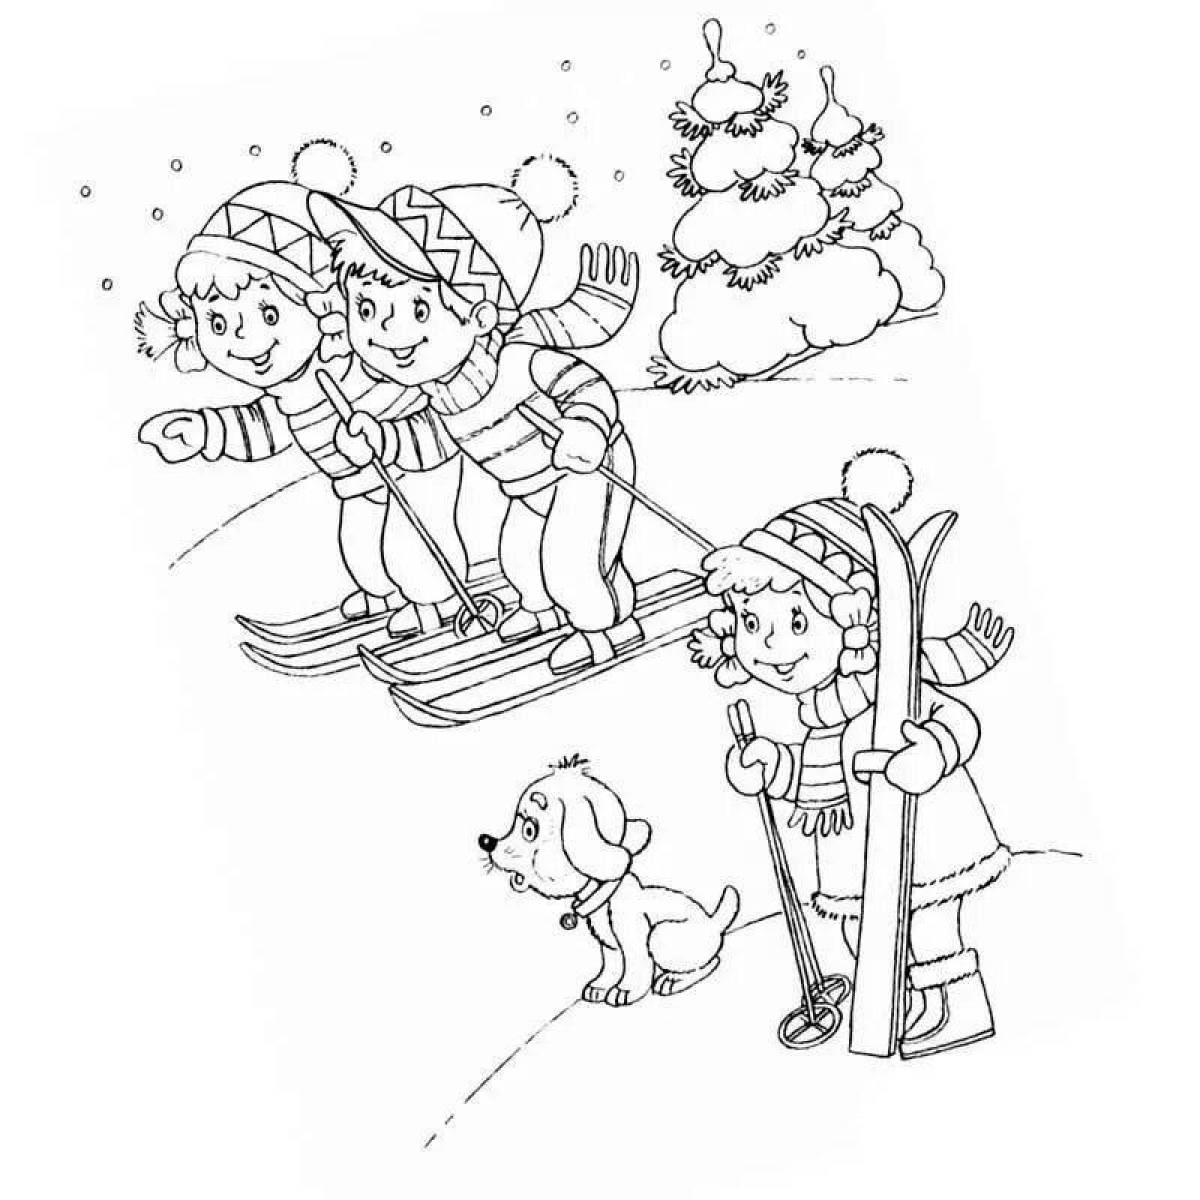 Exciting winter fun coloring book